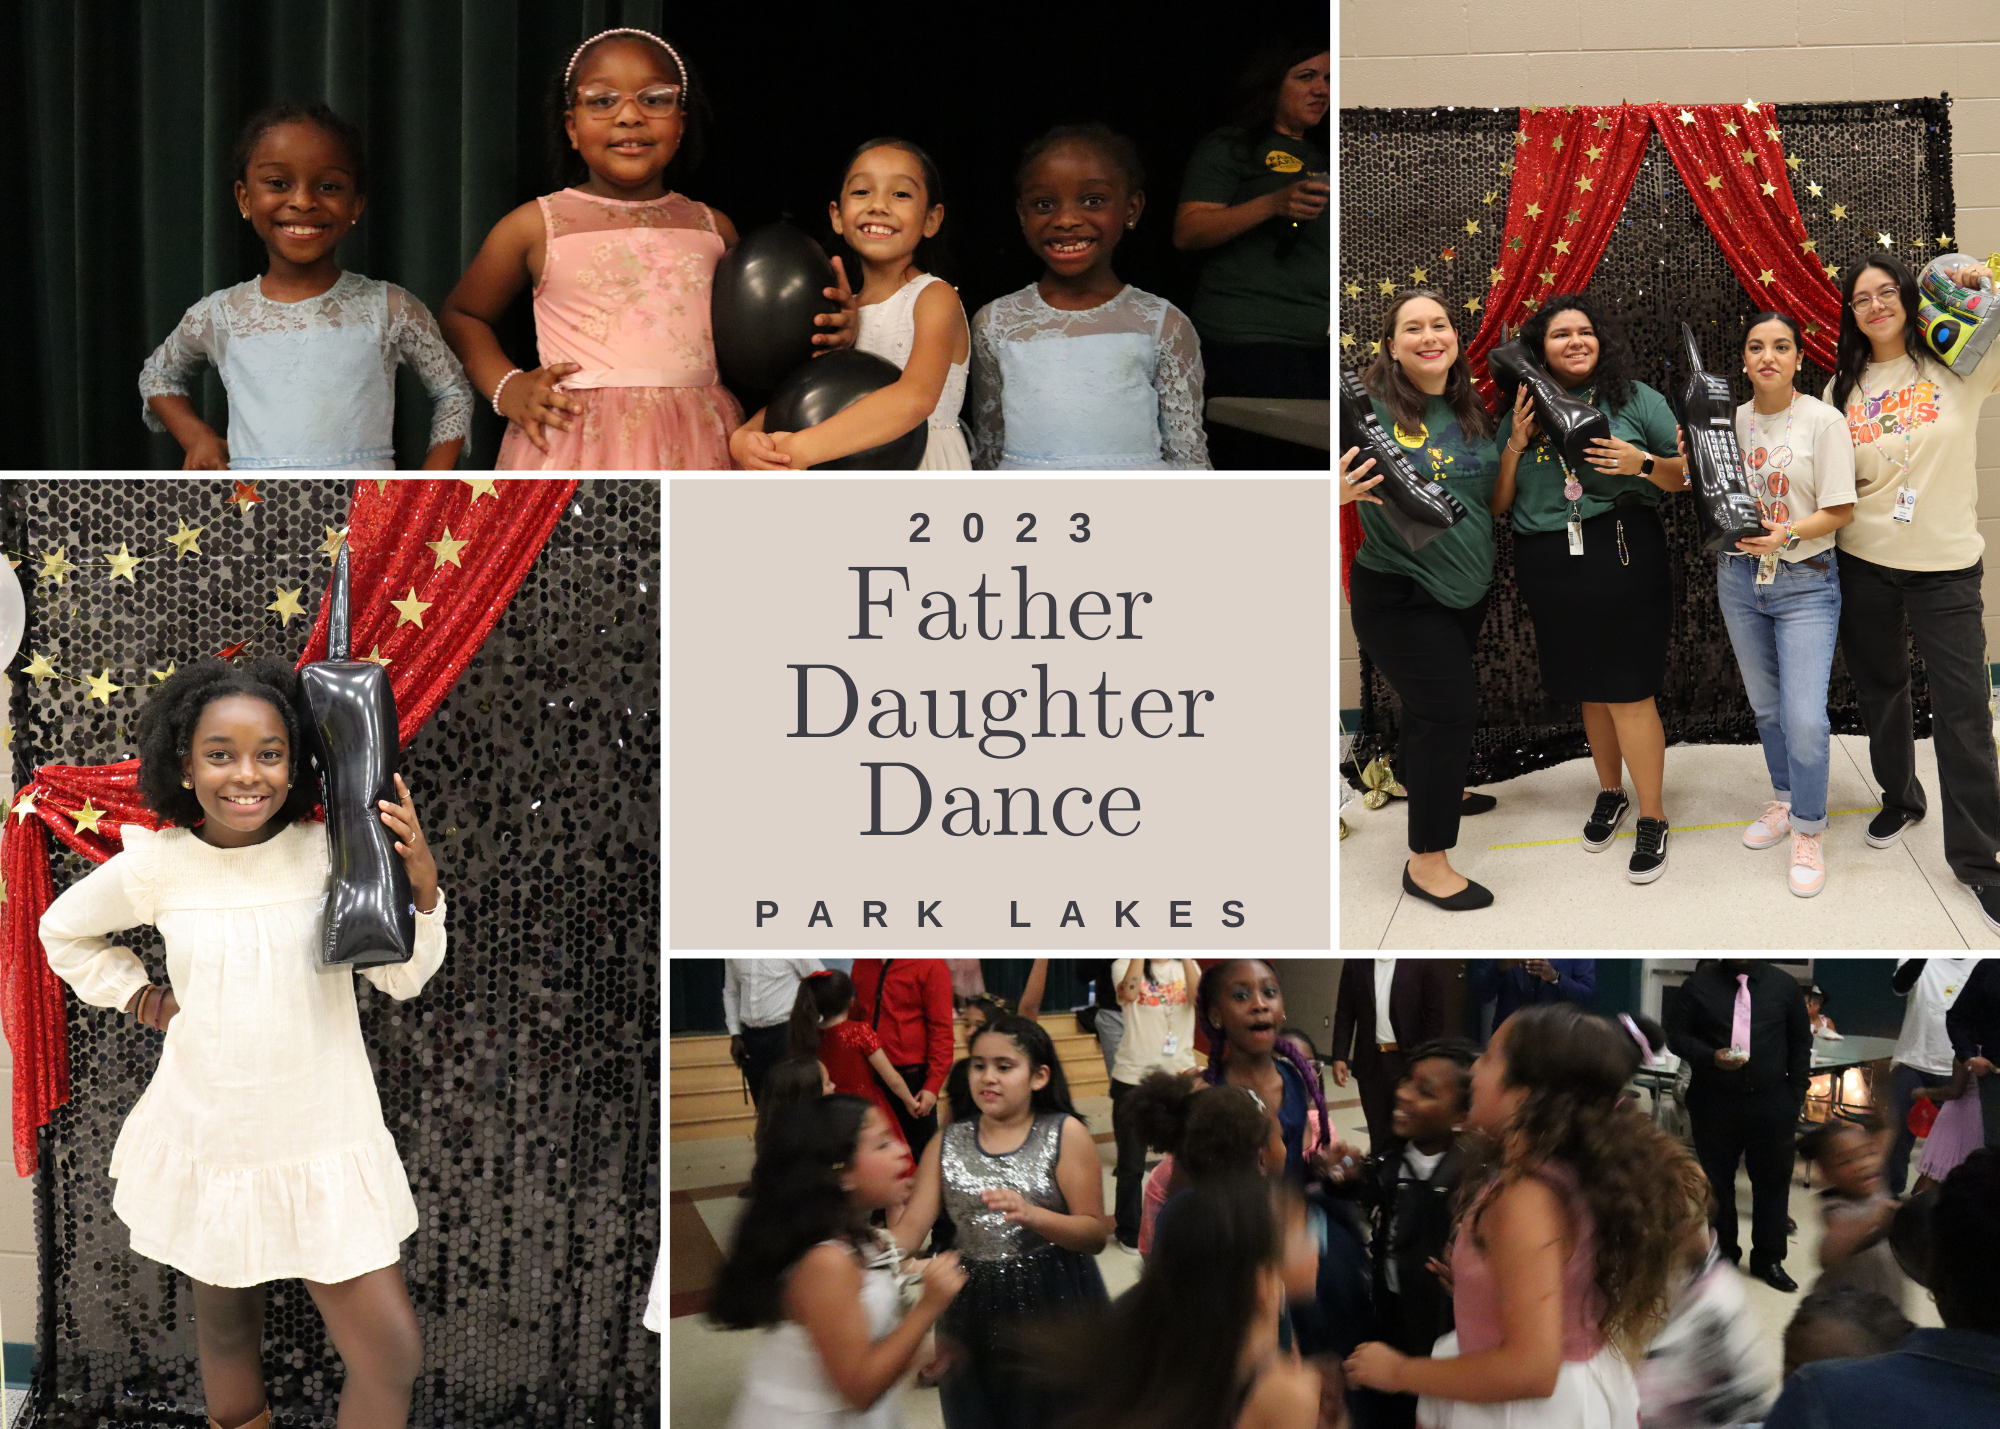 Collage of images from the Father Daughter Dance